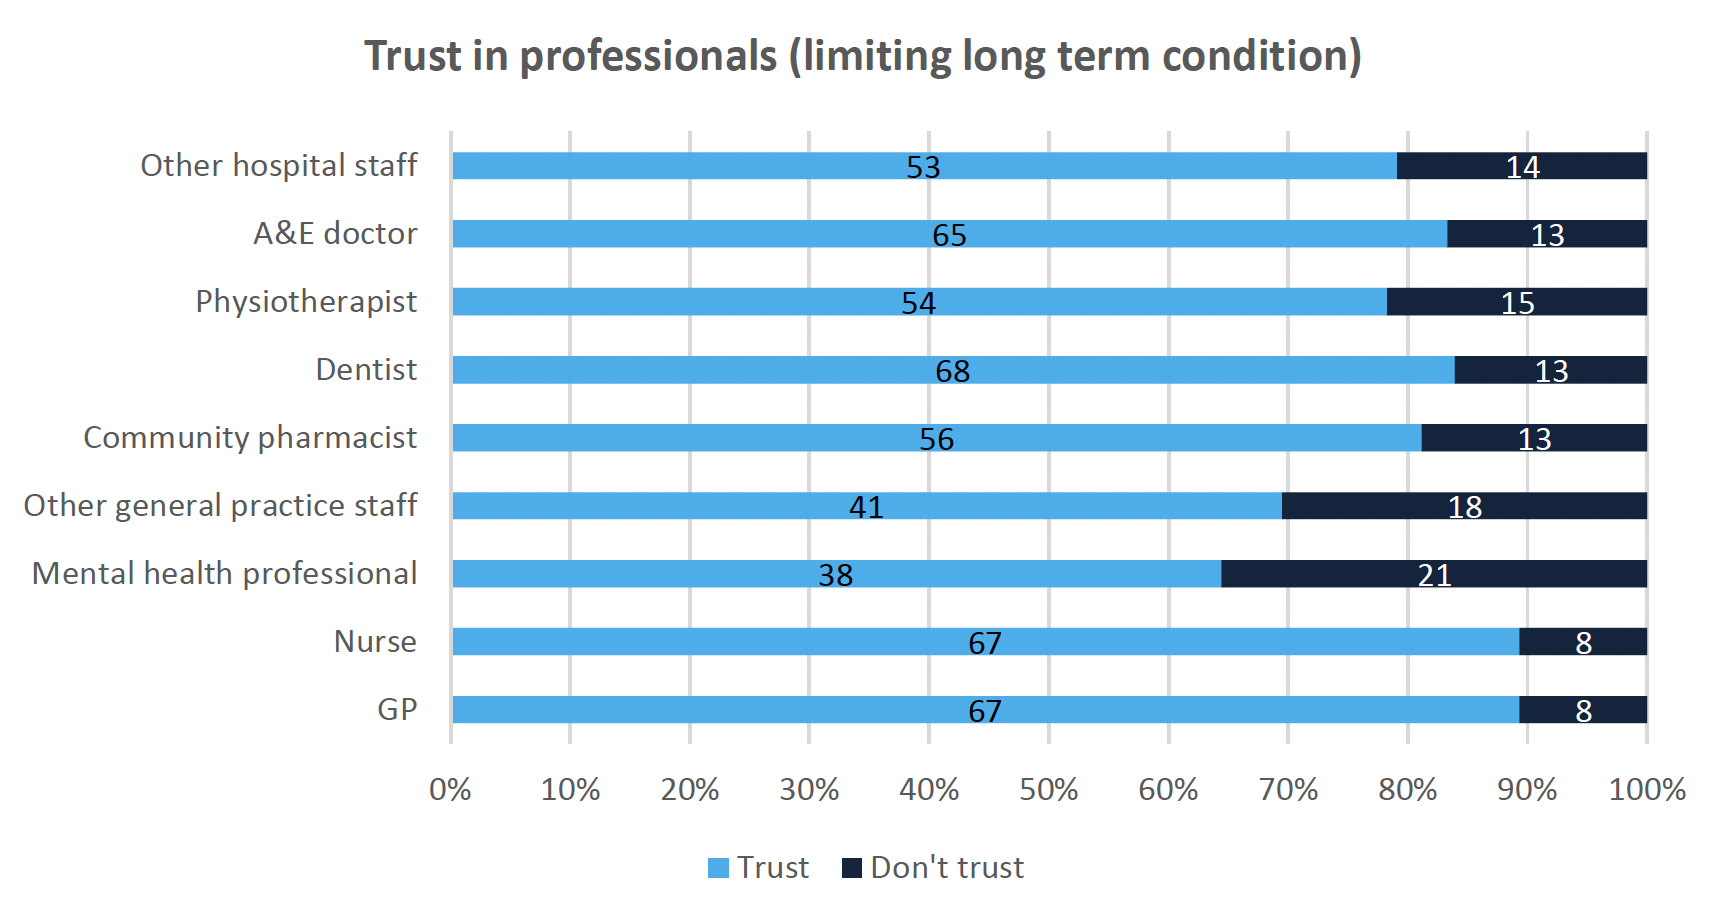 Stacked horizontal graphing showing trust in professionals for those with limiting long term condition
This stacked horizontal graph shows respondents with a limiting long term condition trust in health care professionals. This graph shows that 67% of respondents would trust their nurse or GP. The least amount of trust was shown for Mental health professionals, with only 38% of respondents saying they would trust them.